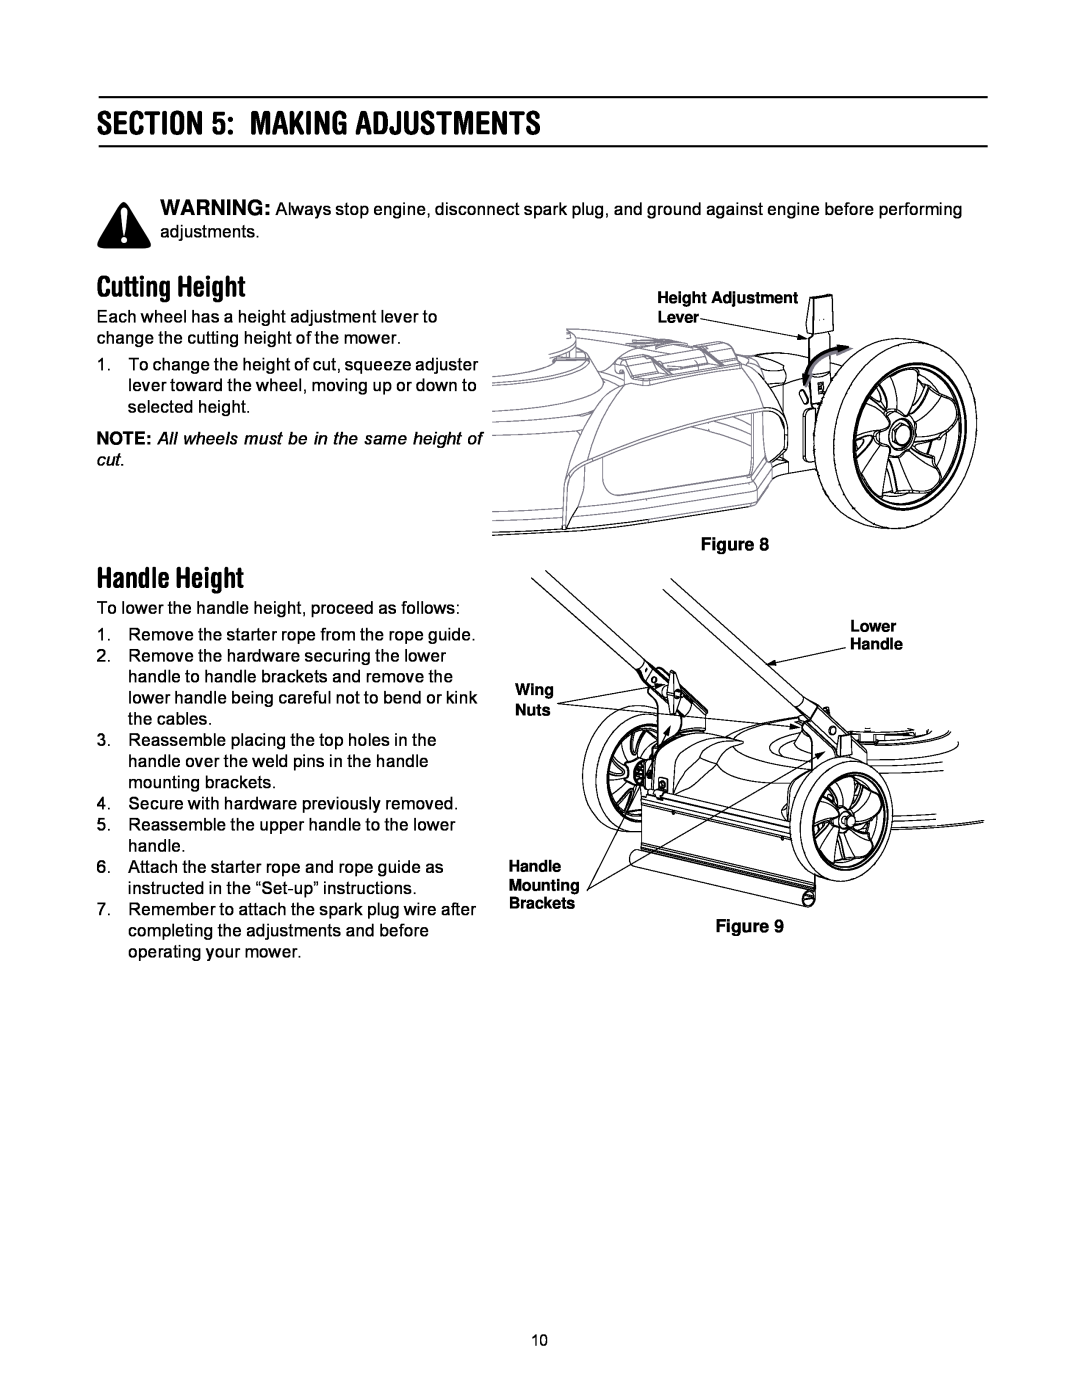 Troy-Bilt 80 manual Making Adjustments, Cutting Height, Handle Height, NOTE All wheels must be in the same height of cut 